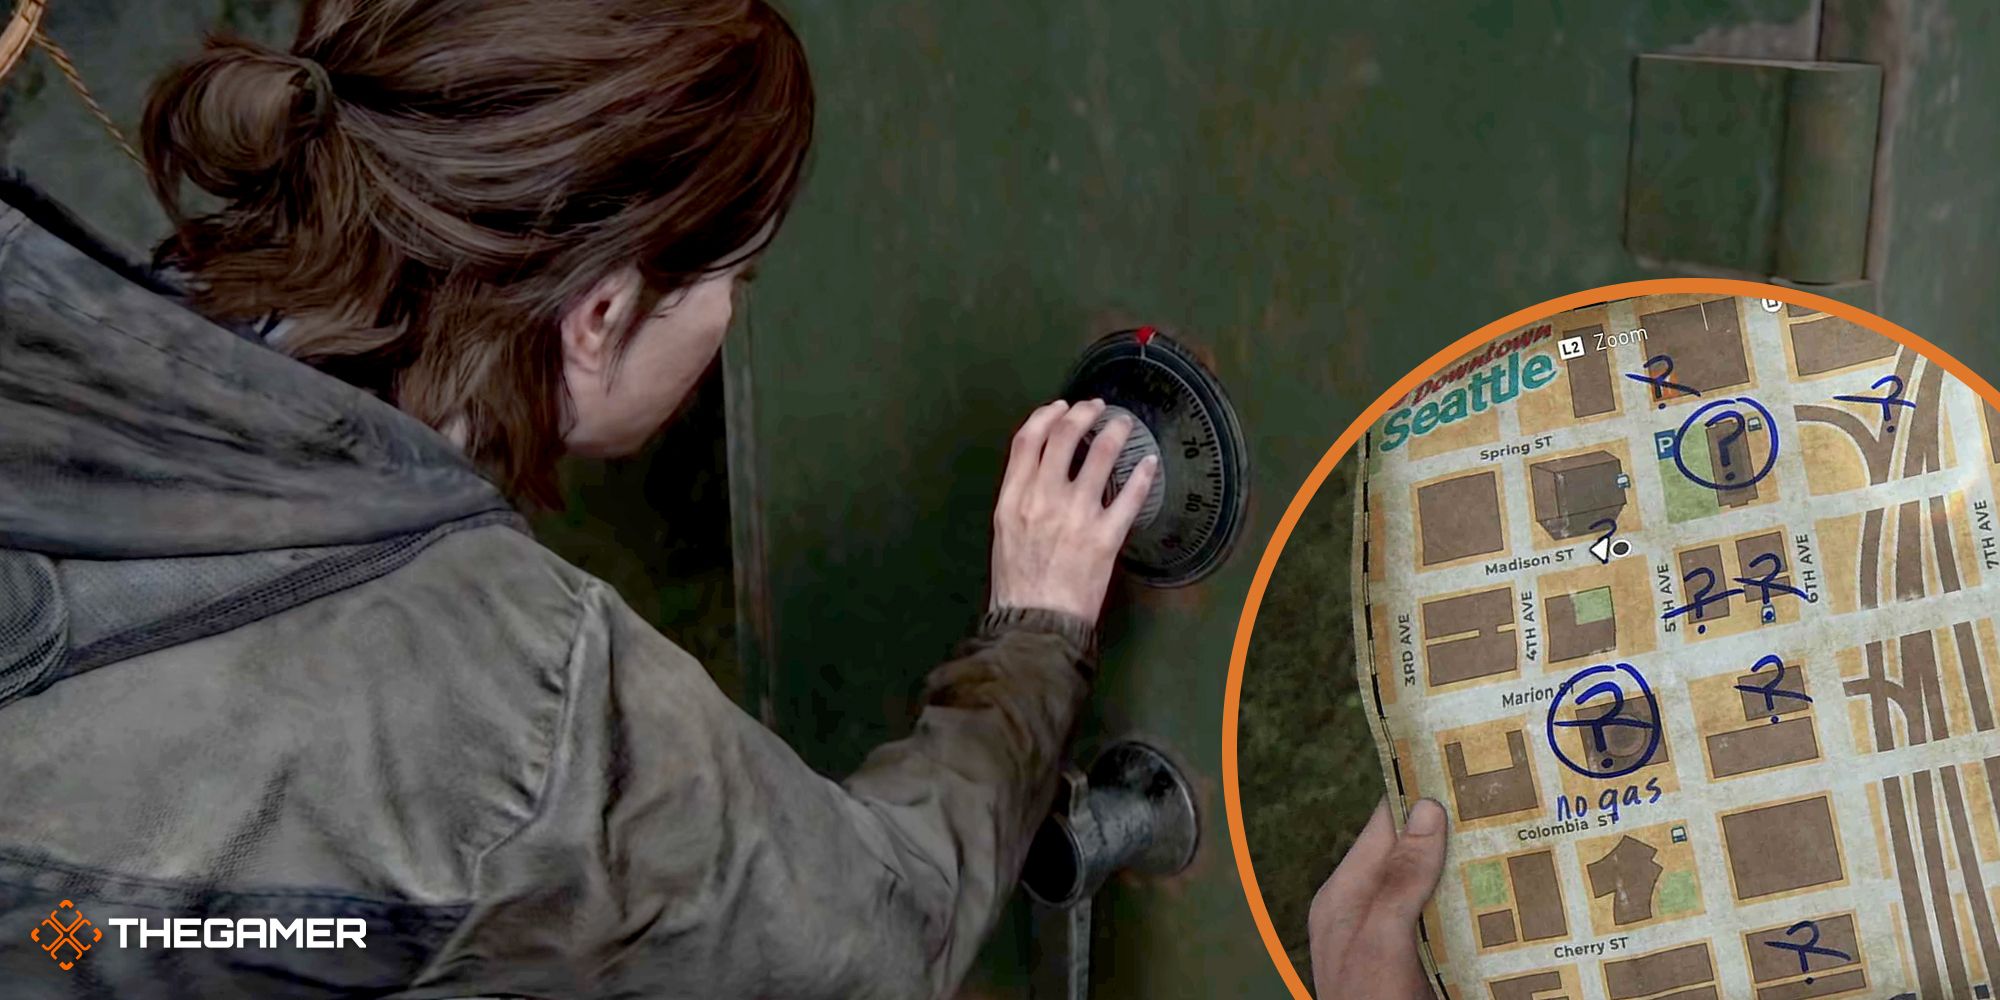 The Last Of Us Part II' safe codes: How to find and unlock every safe